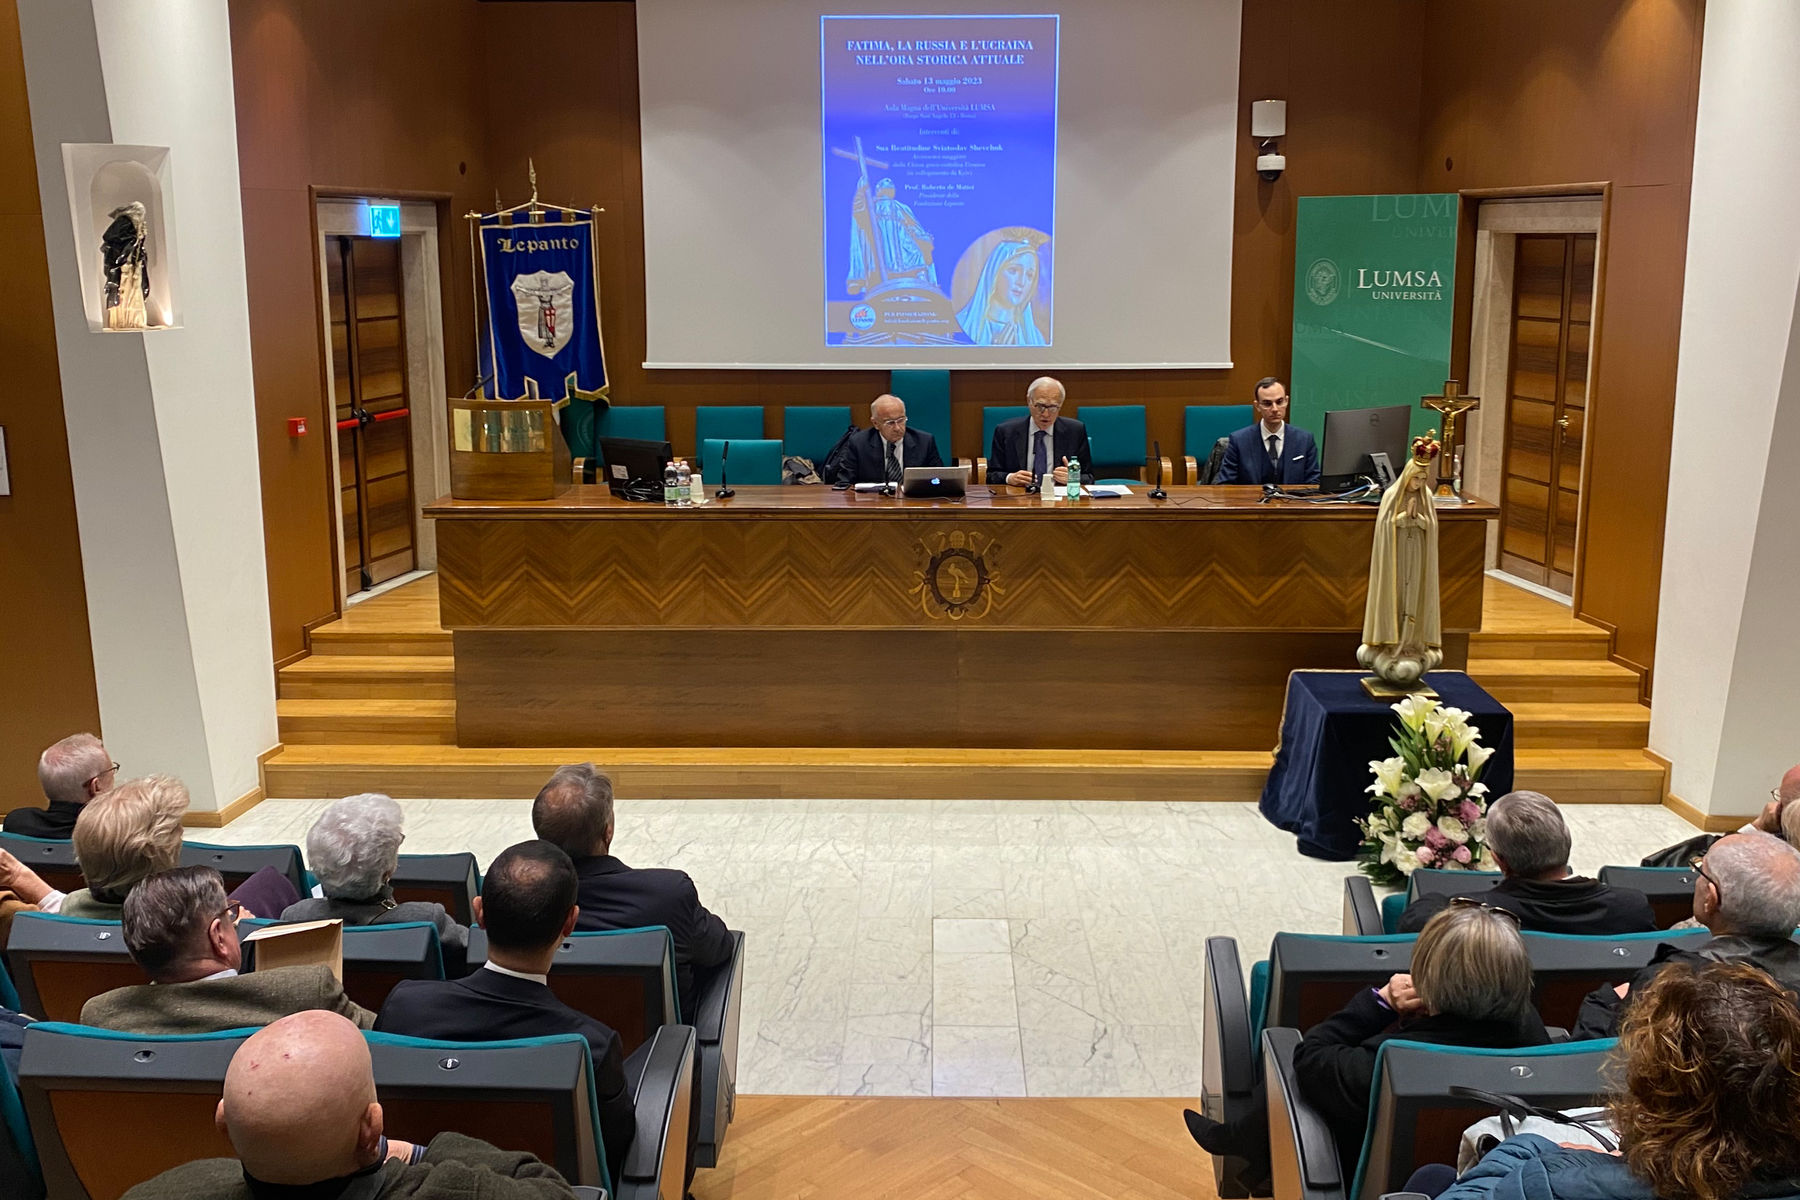 “A miracle on the Dnipro”: His Beatitude Sviatoslav on the rescue of Kyiv at the Conference at the LUMSA University in Rome 